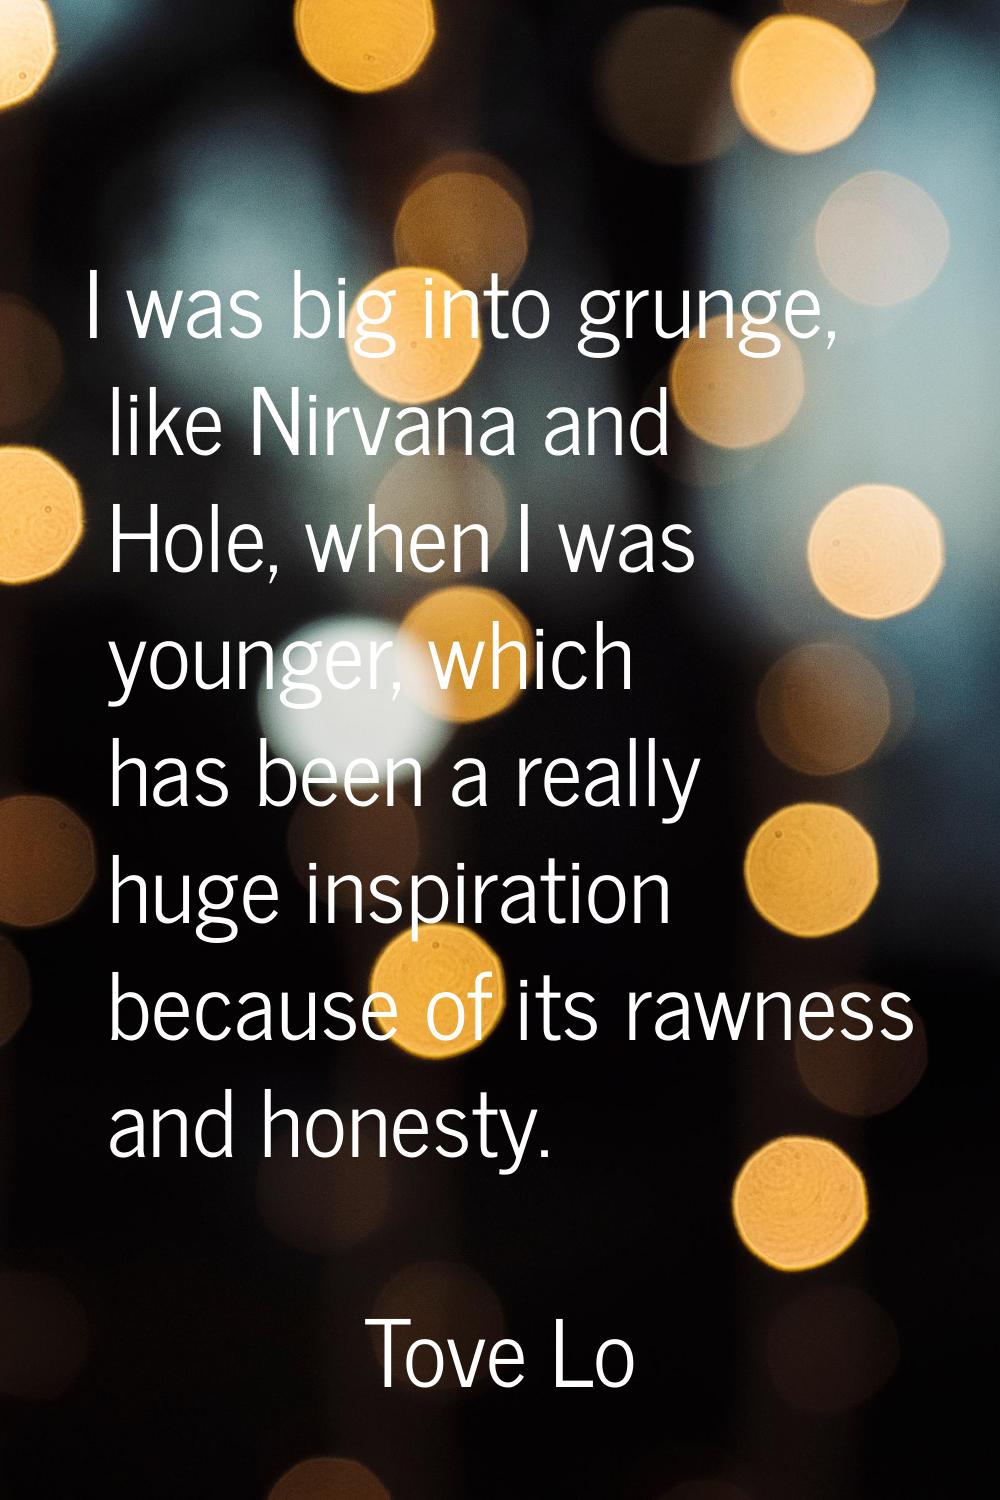 I was big into grunge, like Nirvana and Hole, when I was younger, which has been a really huge insp